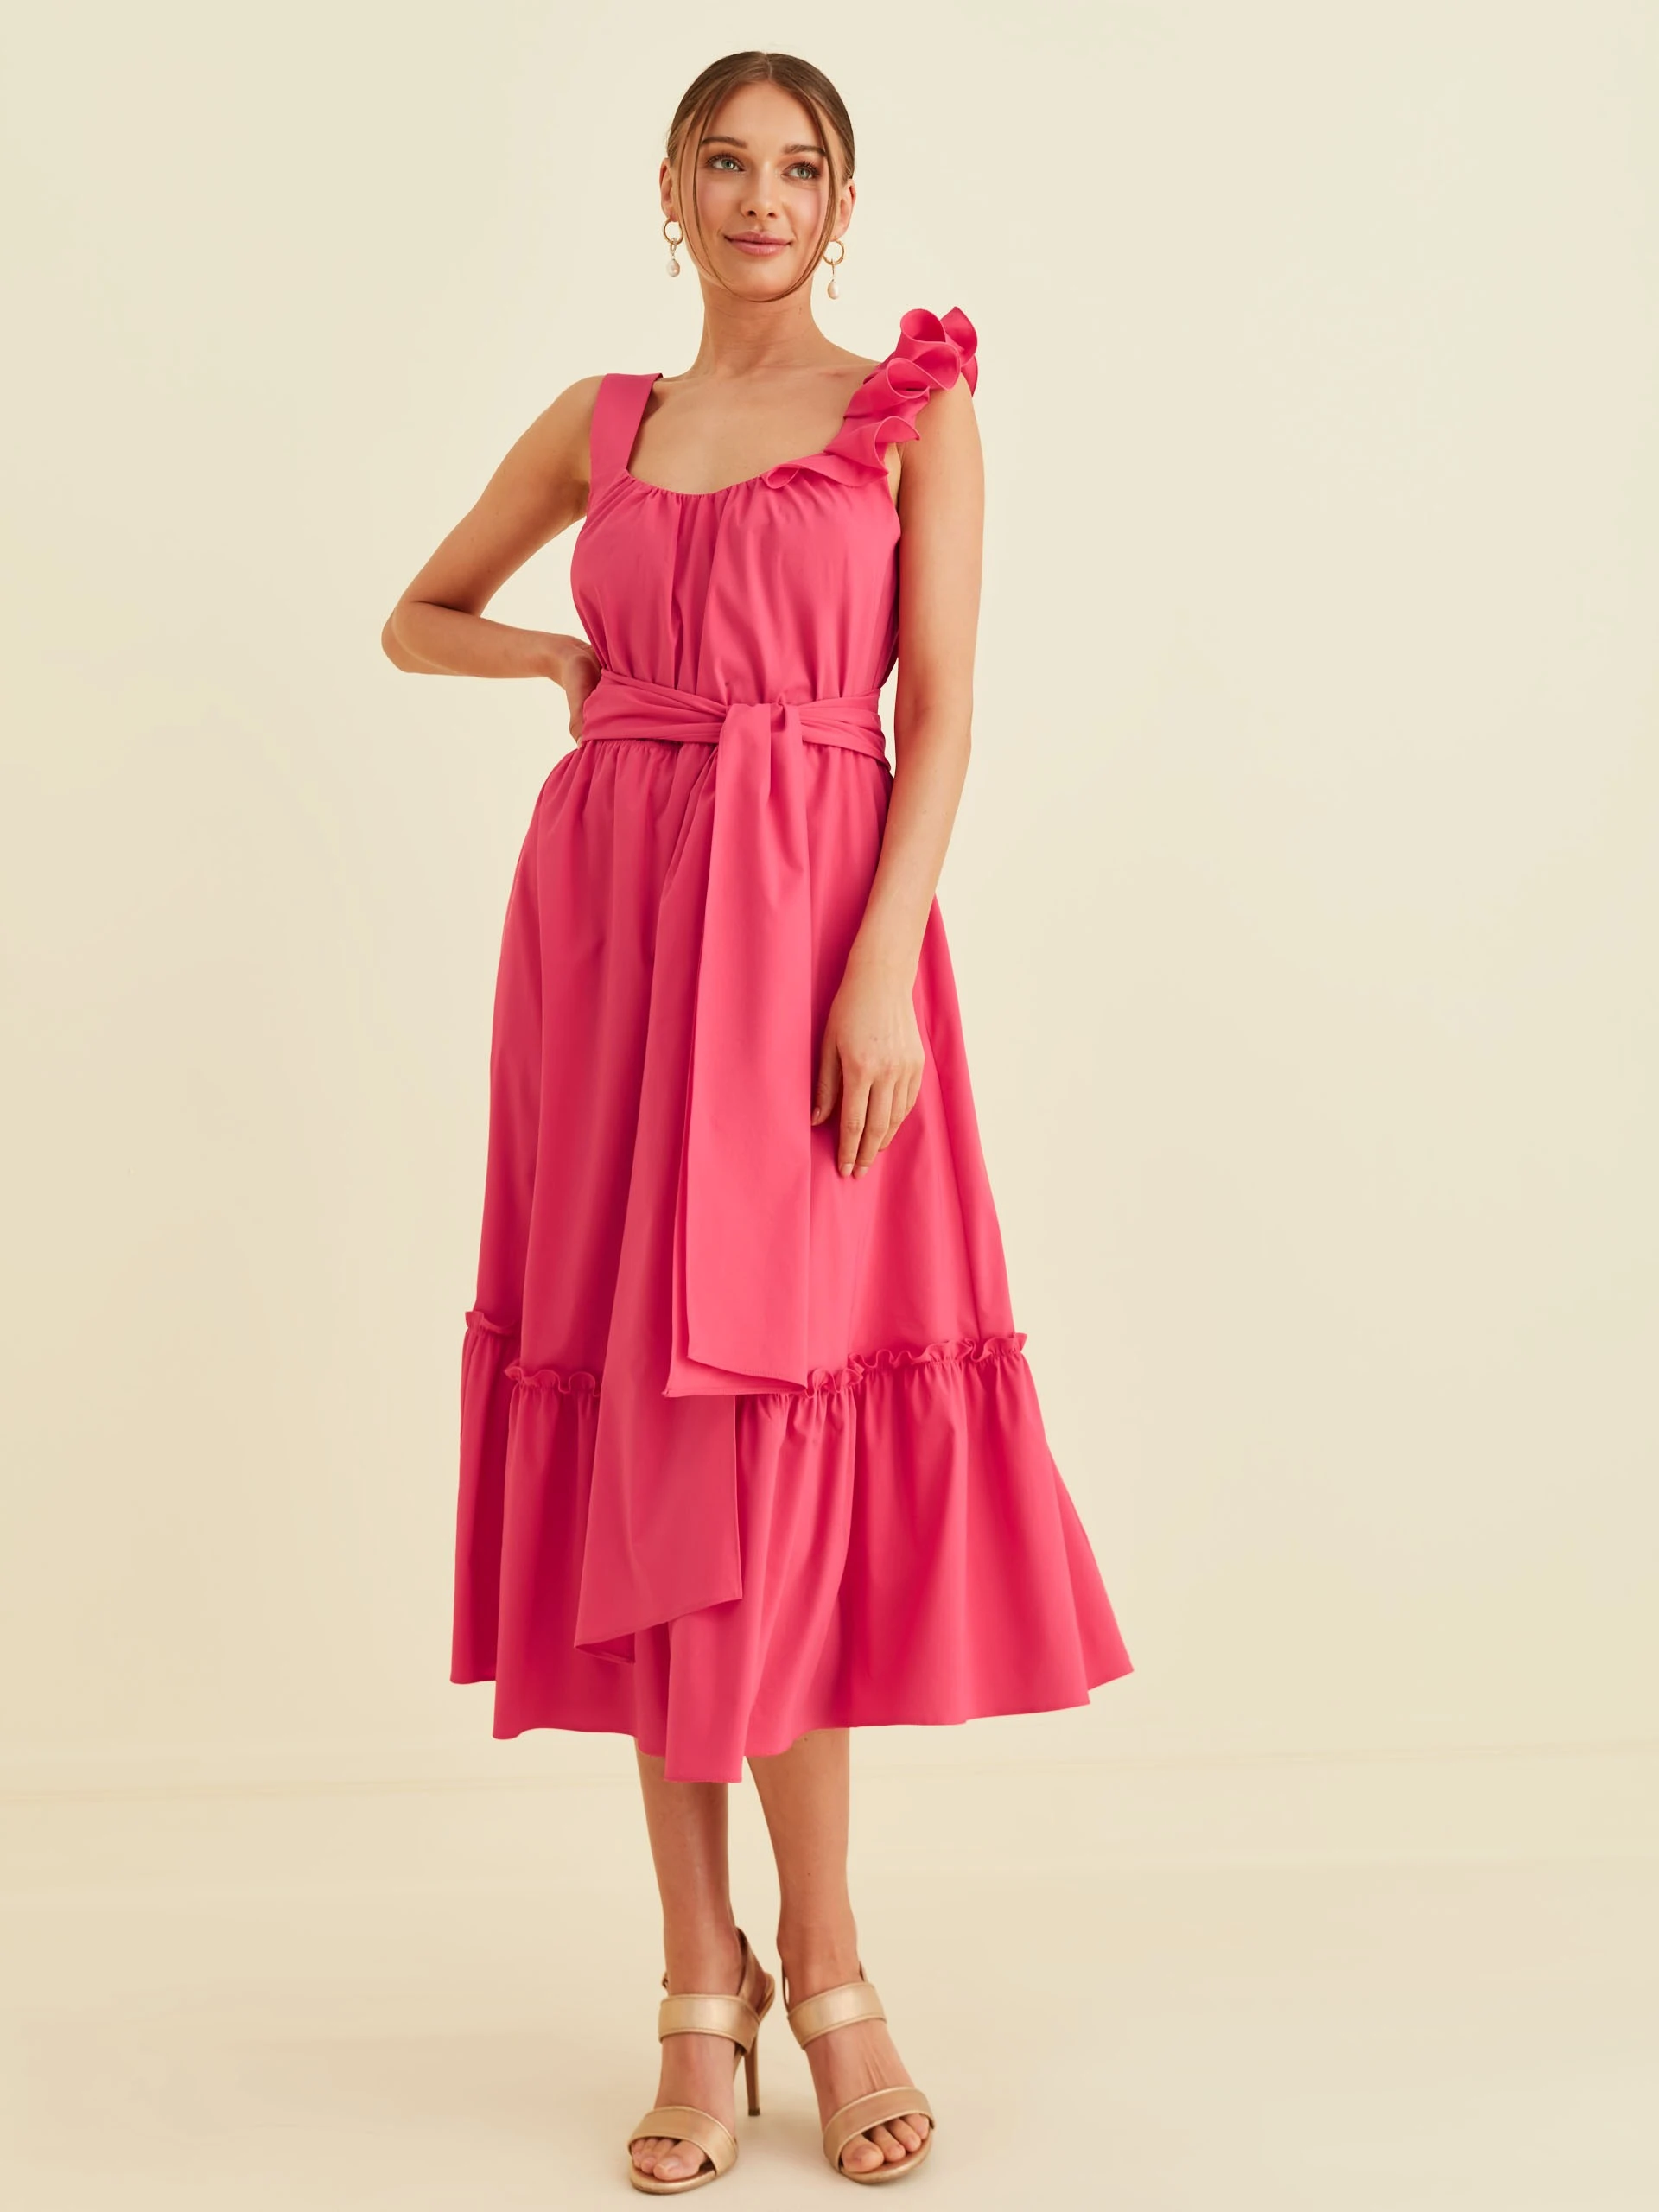 PINK DRESS WITH FRILLS AND WAIST TIE